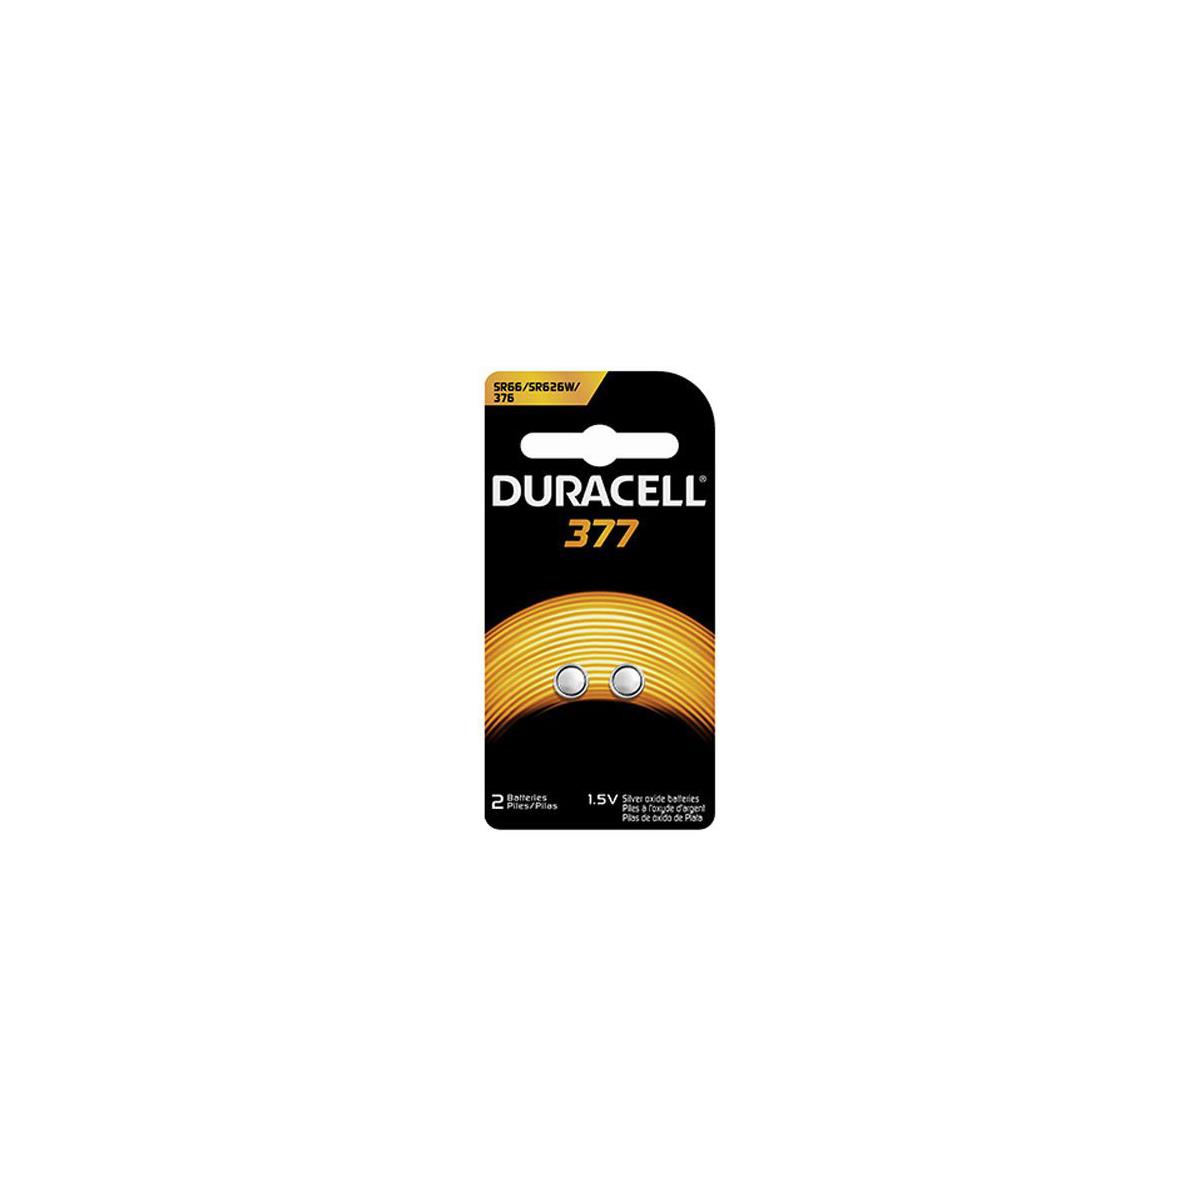 Image of Duracell D377 1.5V Silver Oxide Battery for Watch/Electronic